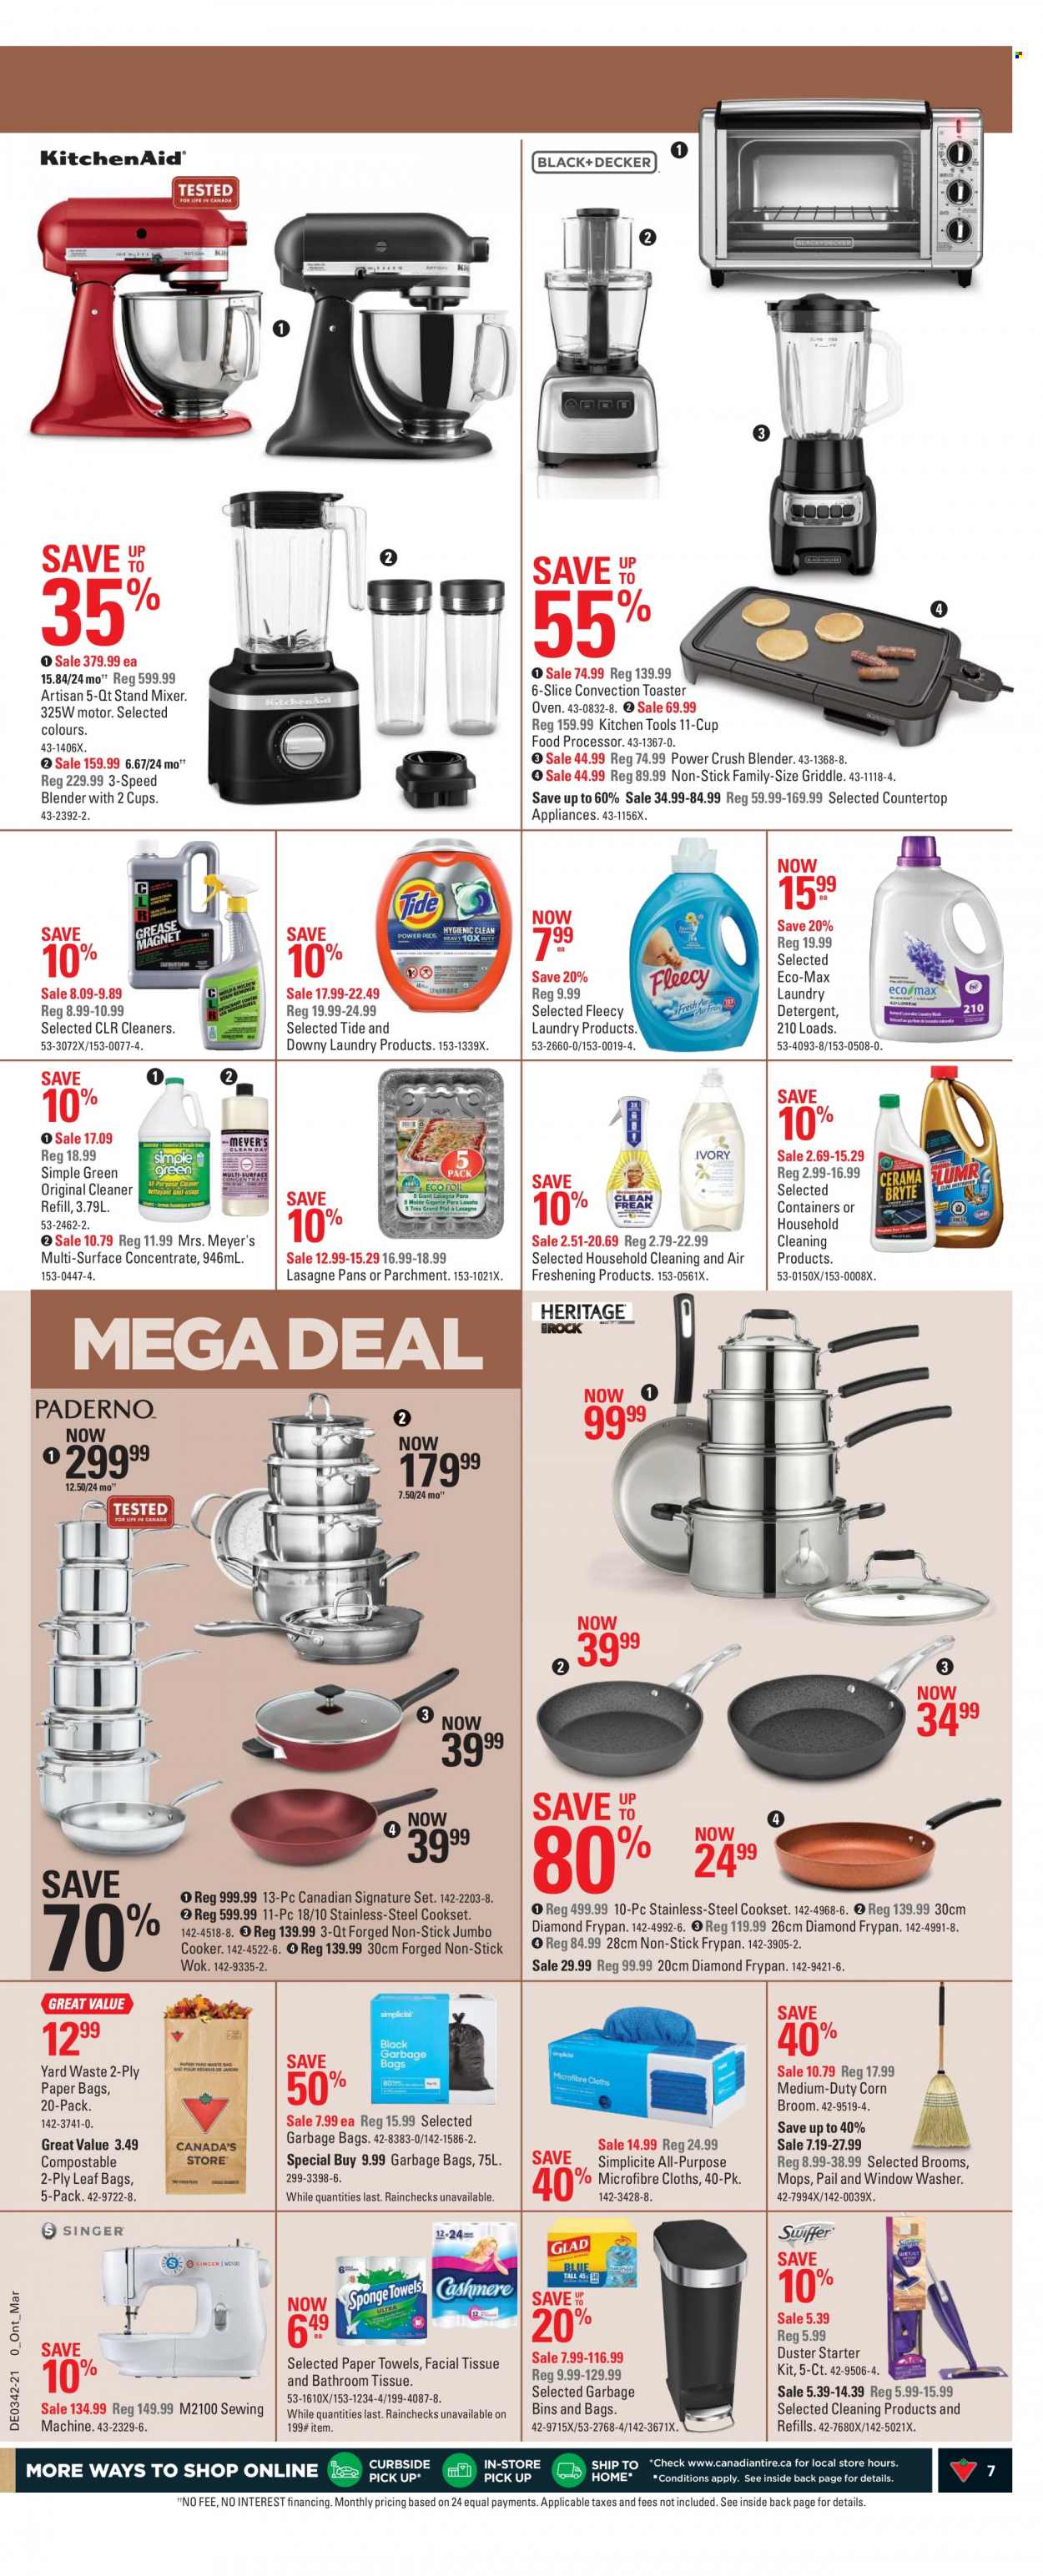 thumbnail - Canadian Tire Flyer - October 15, 2021 - October 21, 2021 - Sales products - bath tissue, kitchen towels, paper towels, cleaner, Tide, laundry detergent, Downy Laundry, bag, duster, broom, wok, frying pan, kitchen tools, washing machine, mixer, stand mixer, food processor, sewing machine, blender, detergent. Page 7.